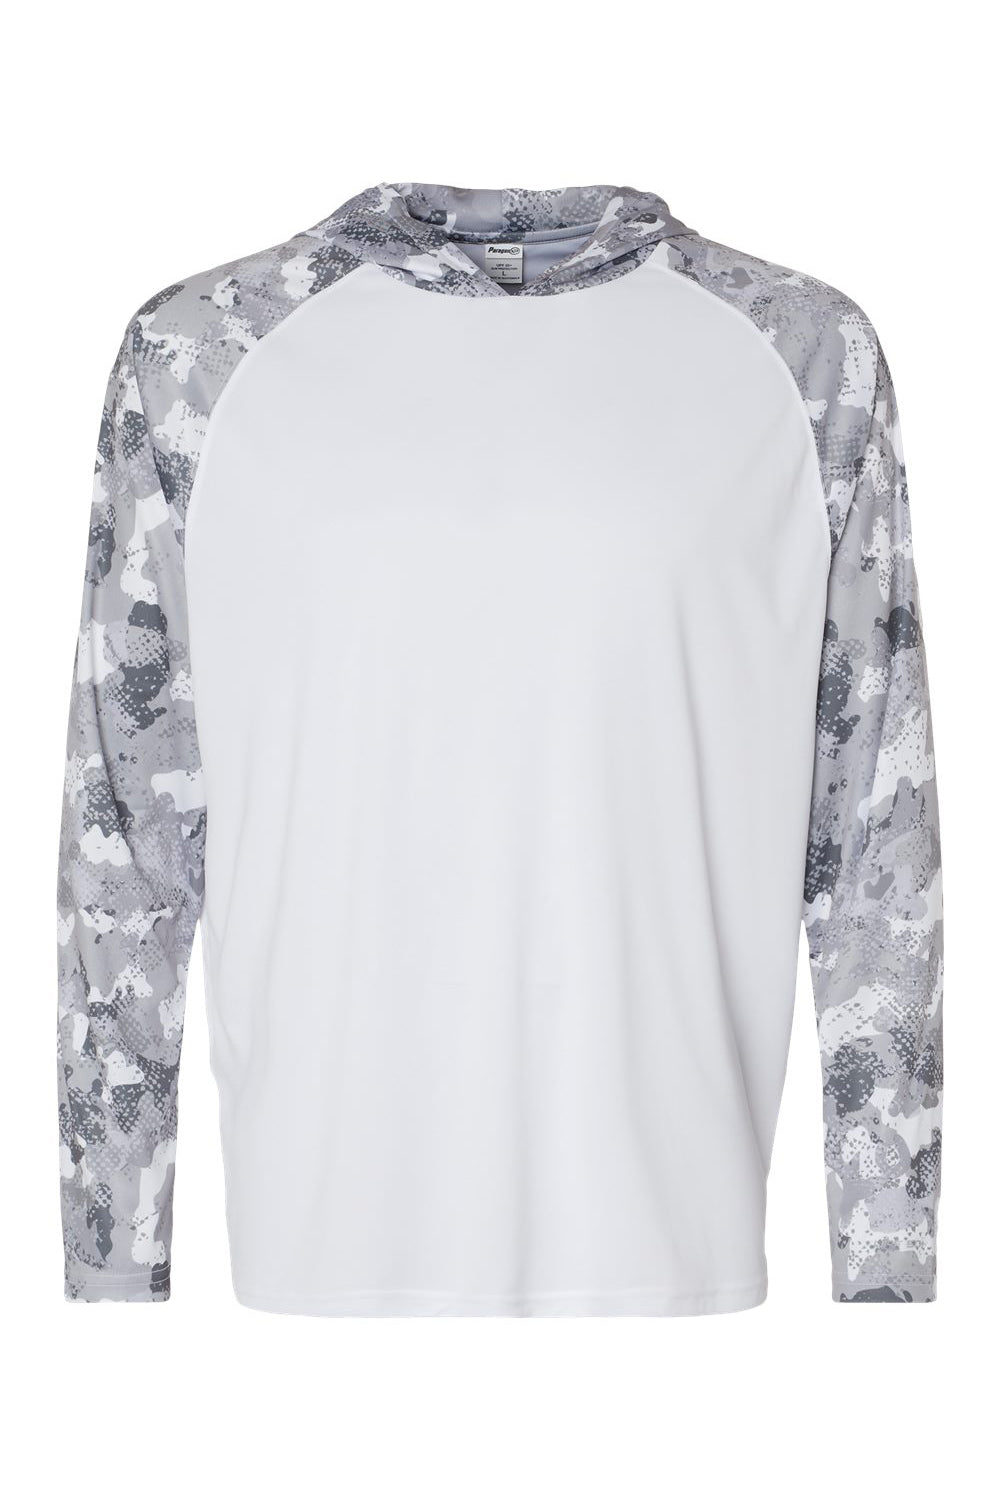 Paragon 240 Mens Tortuga Extreme Performance Long Sleeve Hooded T-Shirt Hoodie White/Aluminum Grey Camo Flat Front